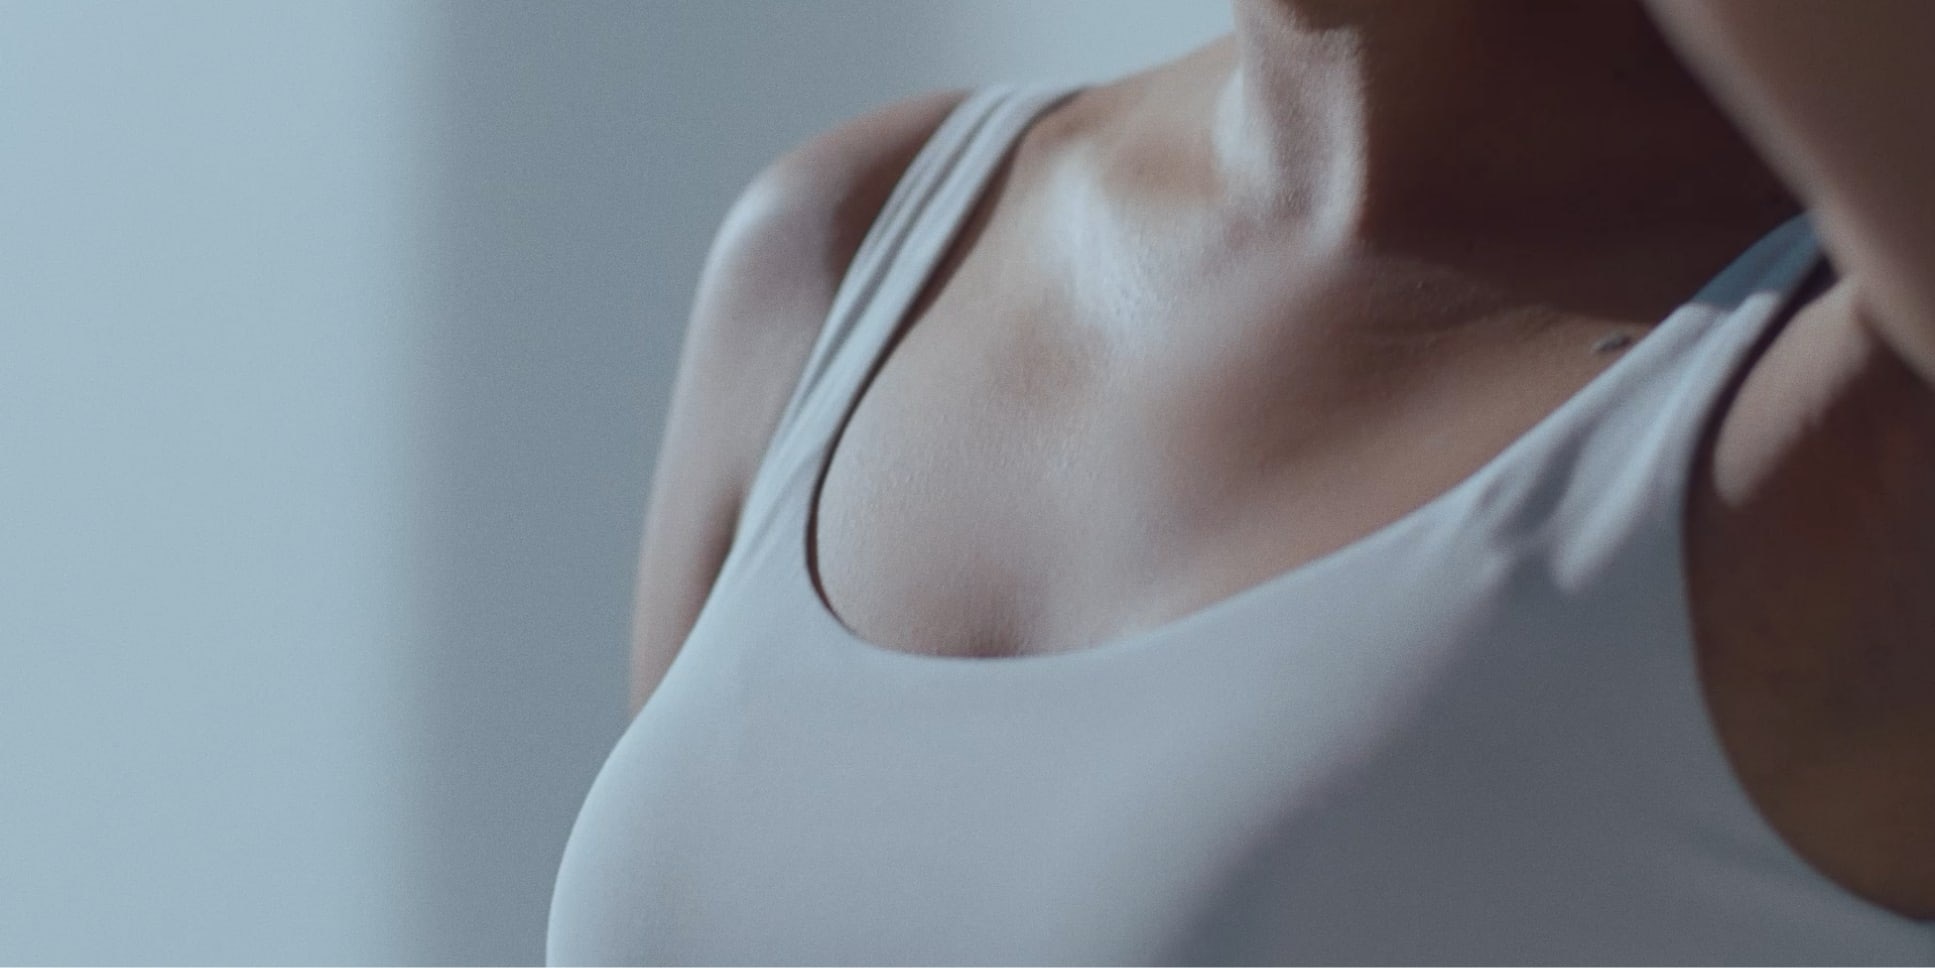 Undershirts for Women with Support Comfortable with Shelf Bra